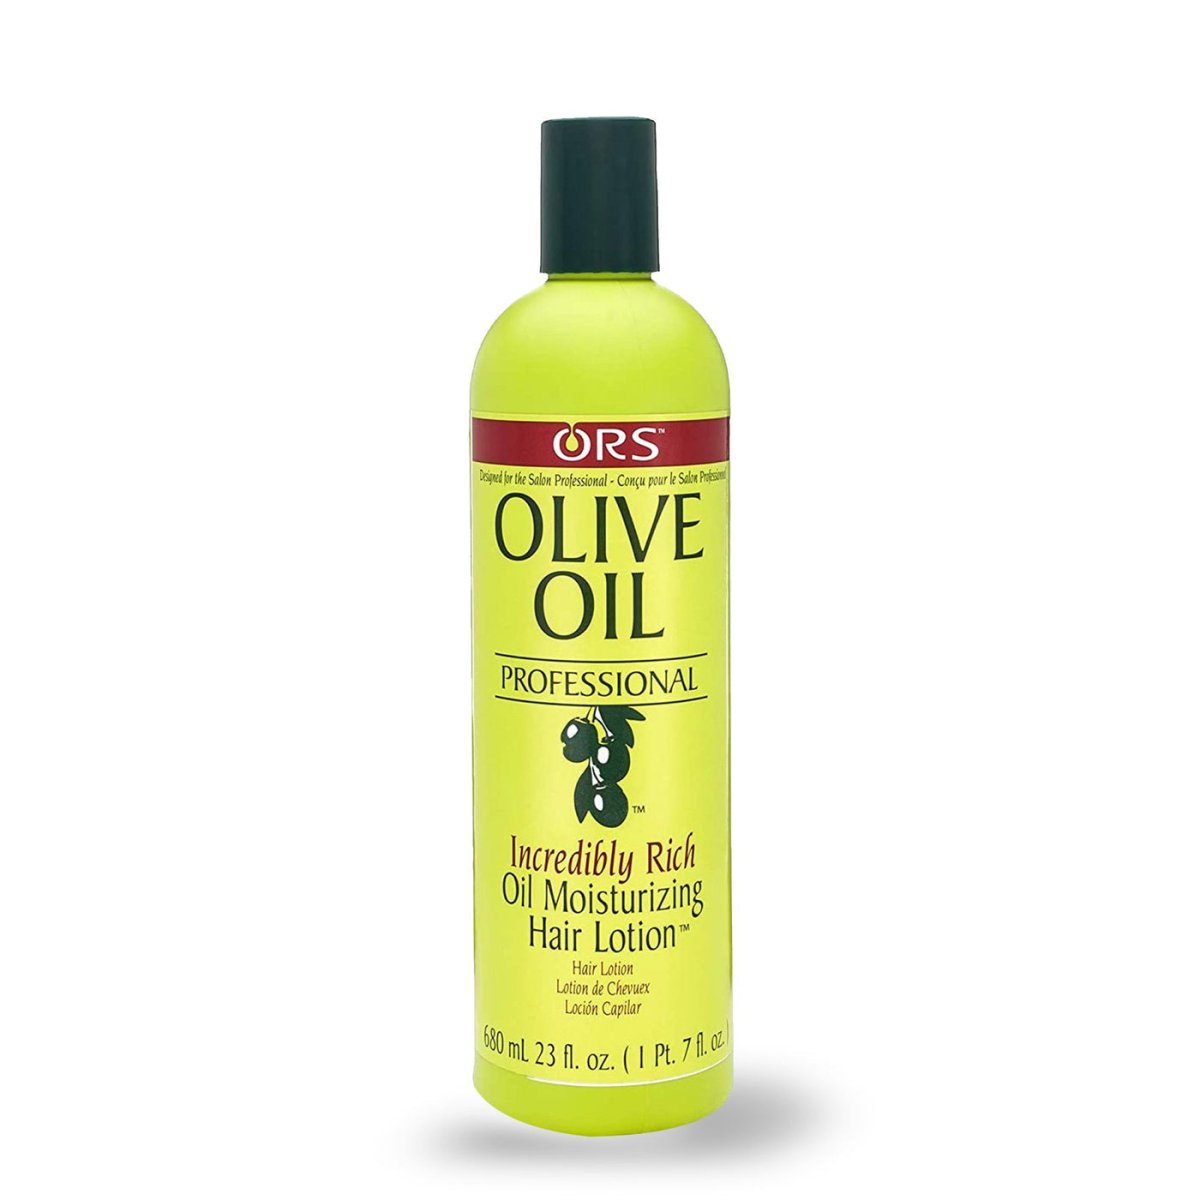 ORS Olive Oil Professional Incredibly Rich Oil Moisturizing Hair Lotion - Southwestsix Cosmetics ORS Olive Oil Professional Incredibly Rich Oil Moisturizing Hair Lotion Hair Moisturiser ORS Southwestsix Cosmetics 251ml ORS Olive Oil Professional Incredibly Rich Oil Moisturizing Hair Lotion